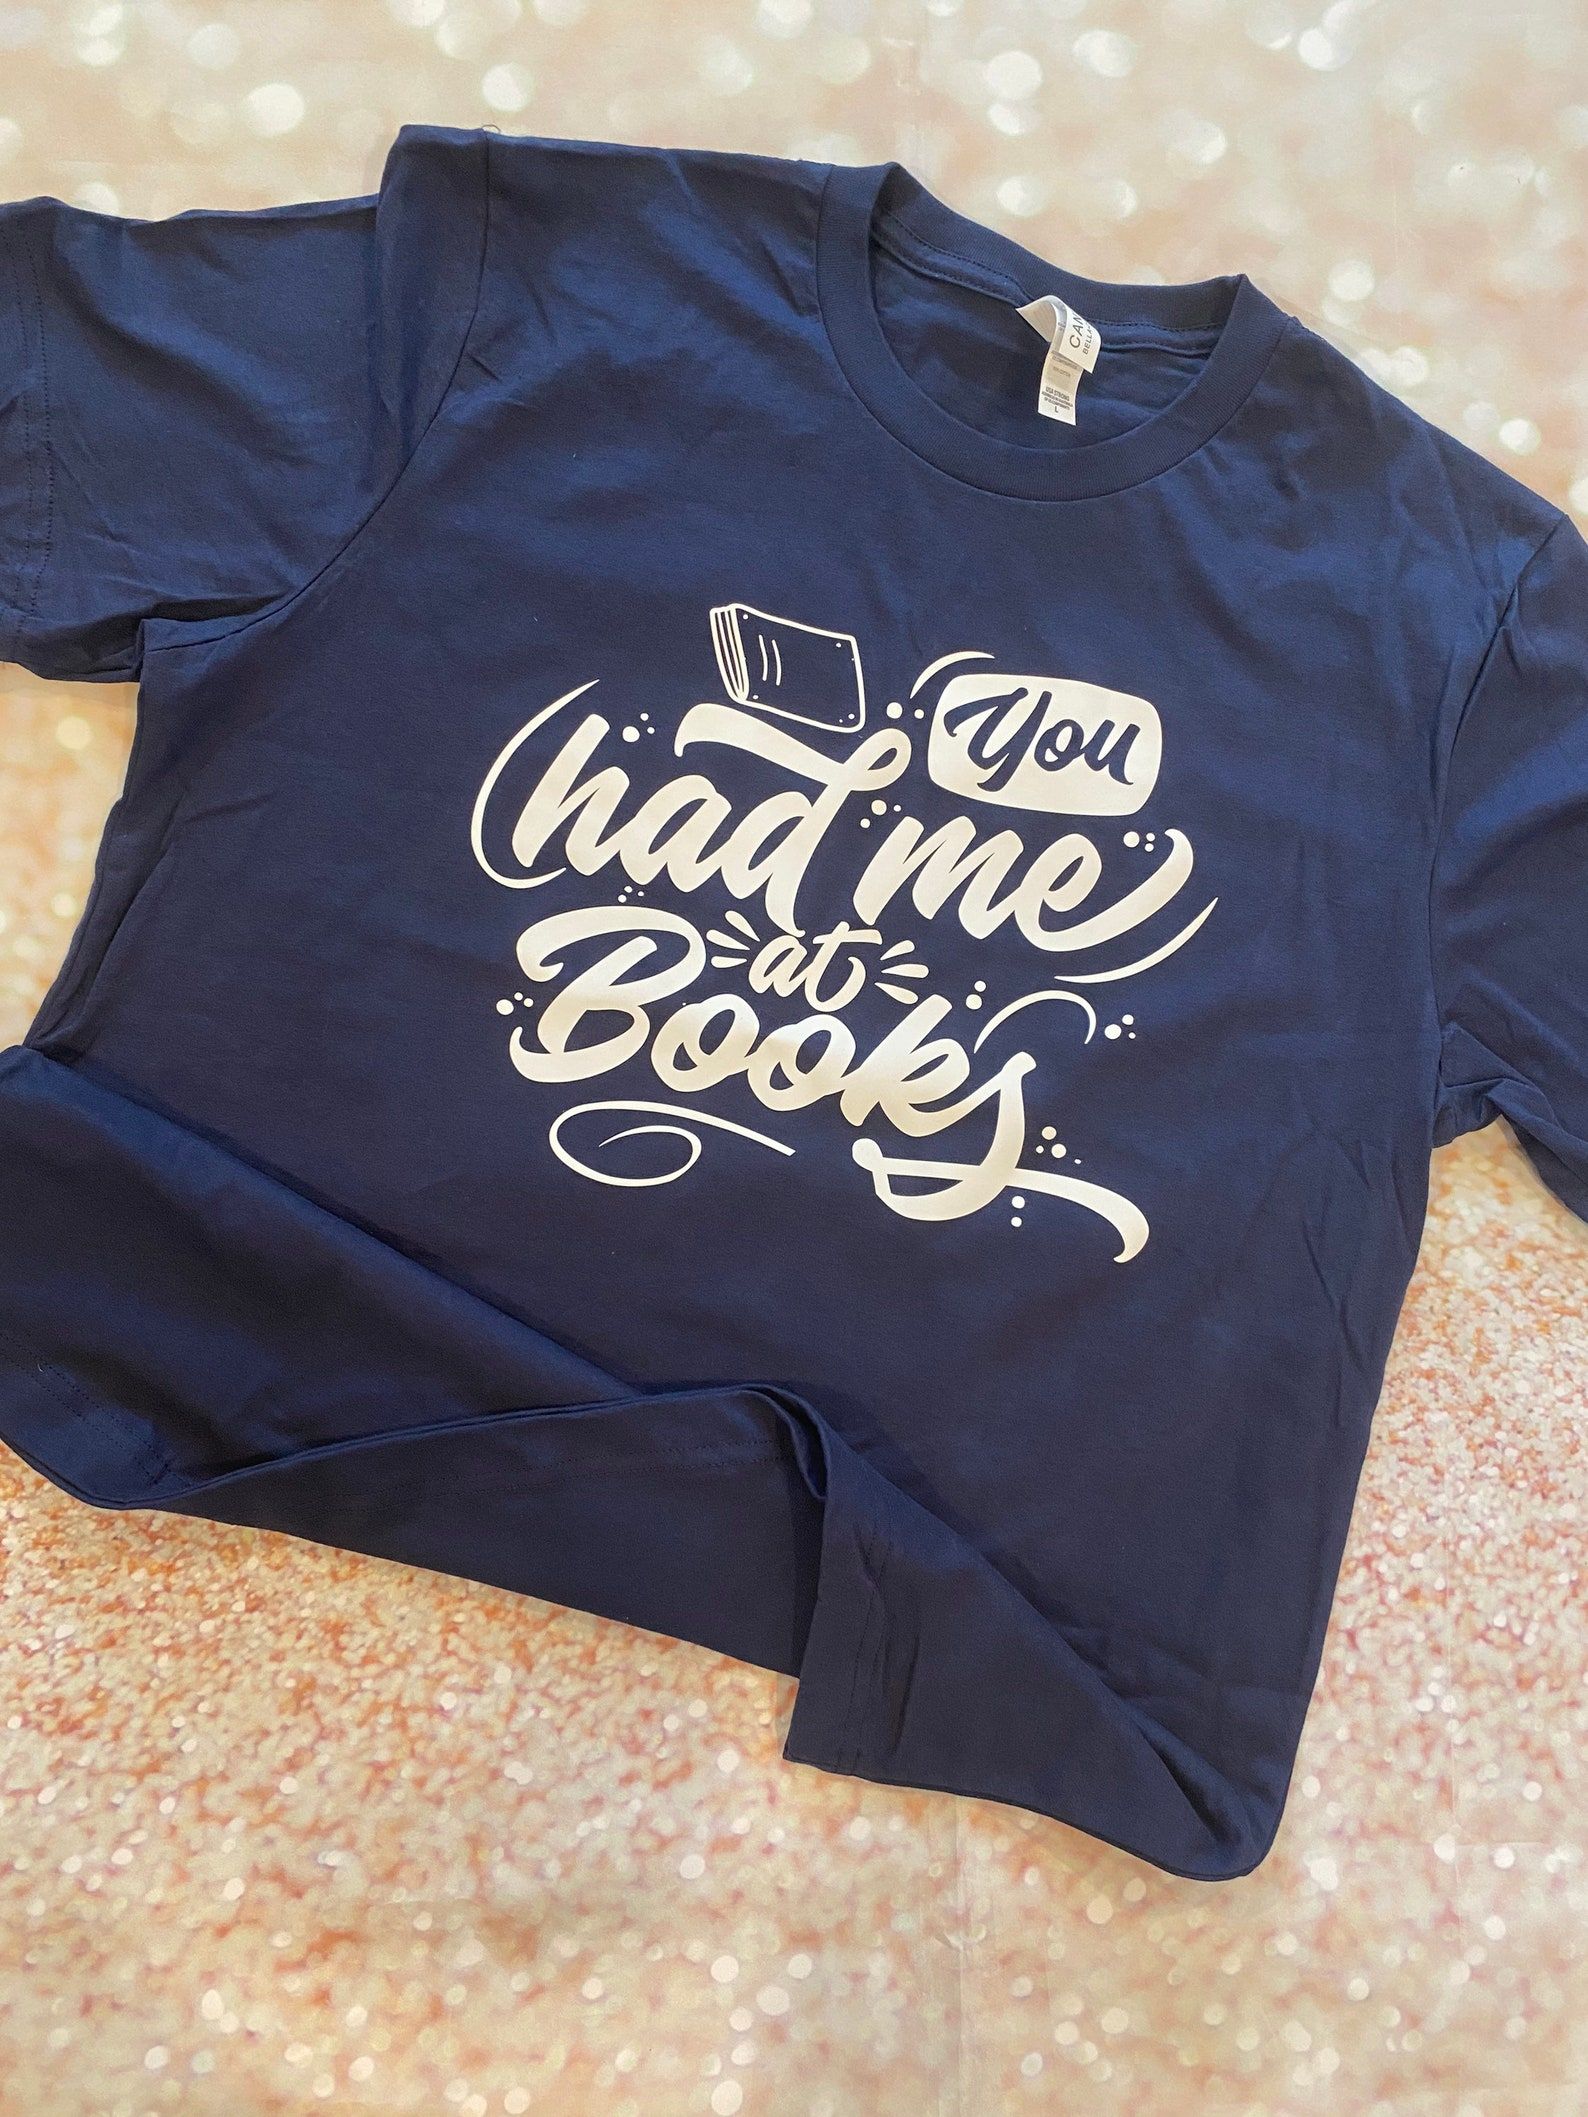 Image of a blue shirt that reads, in script font, "you had me at books."